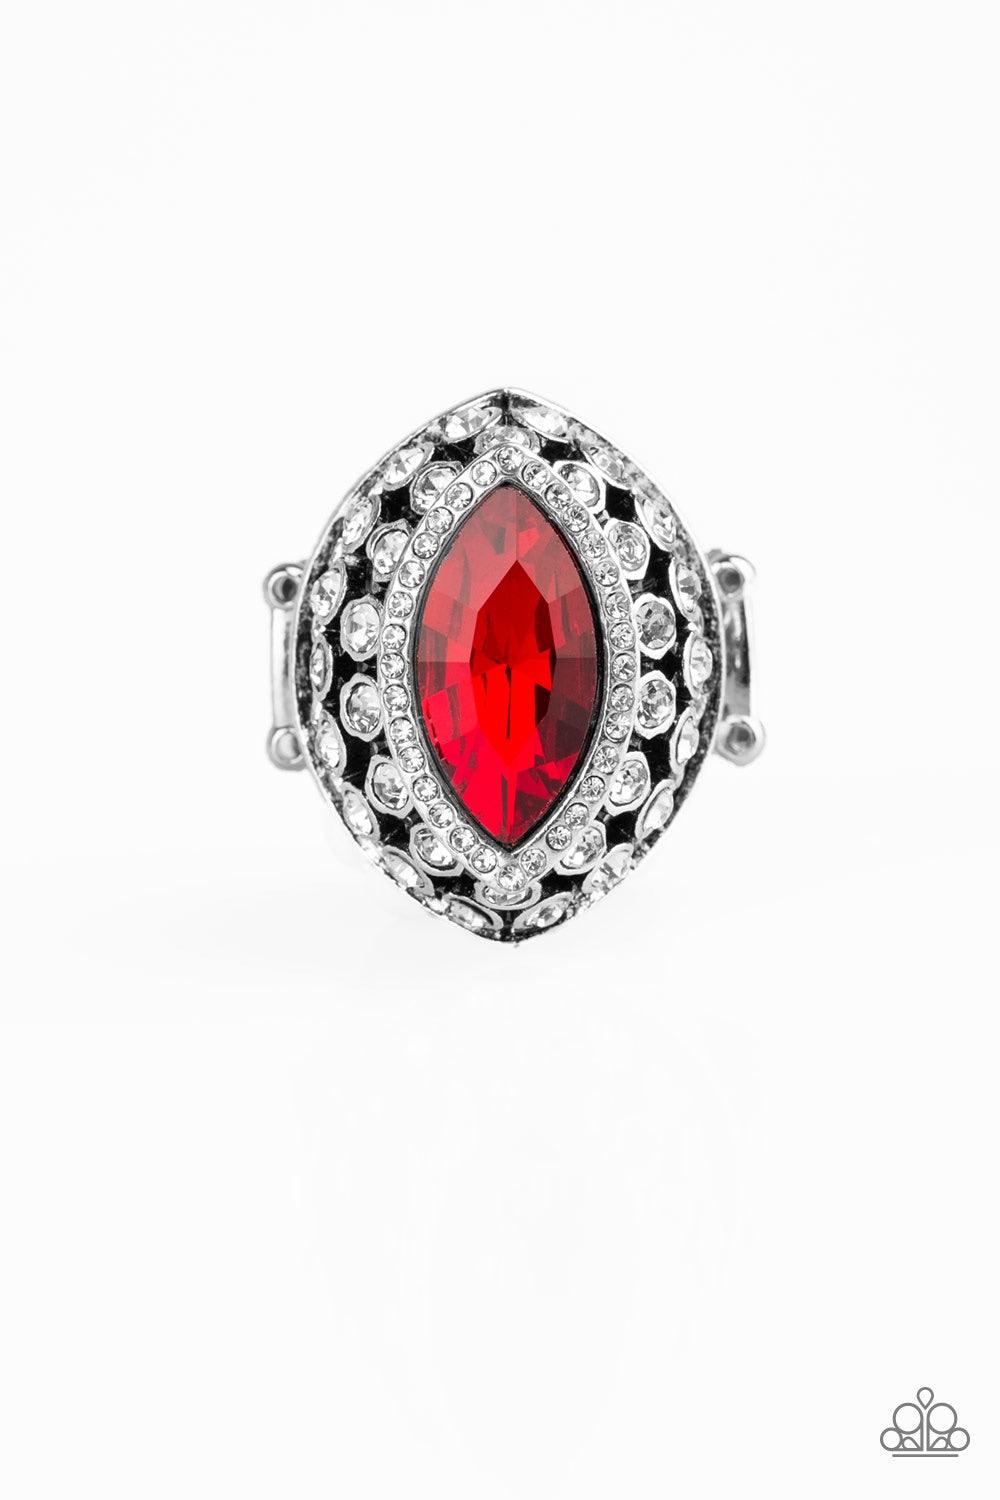 Paparazzi Accessories Royal Radiance - Red Featuring a regal marquise style cut, a fiery red rhinestone is pressed into the center of a silver frame radiating with glittery white rhinestones for a blinding finish. Features a stretchy band for a flexible f